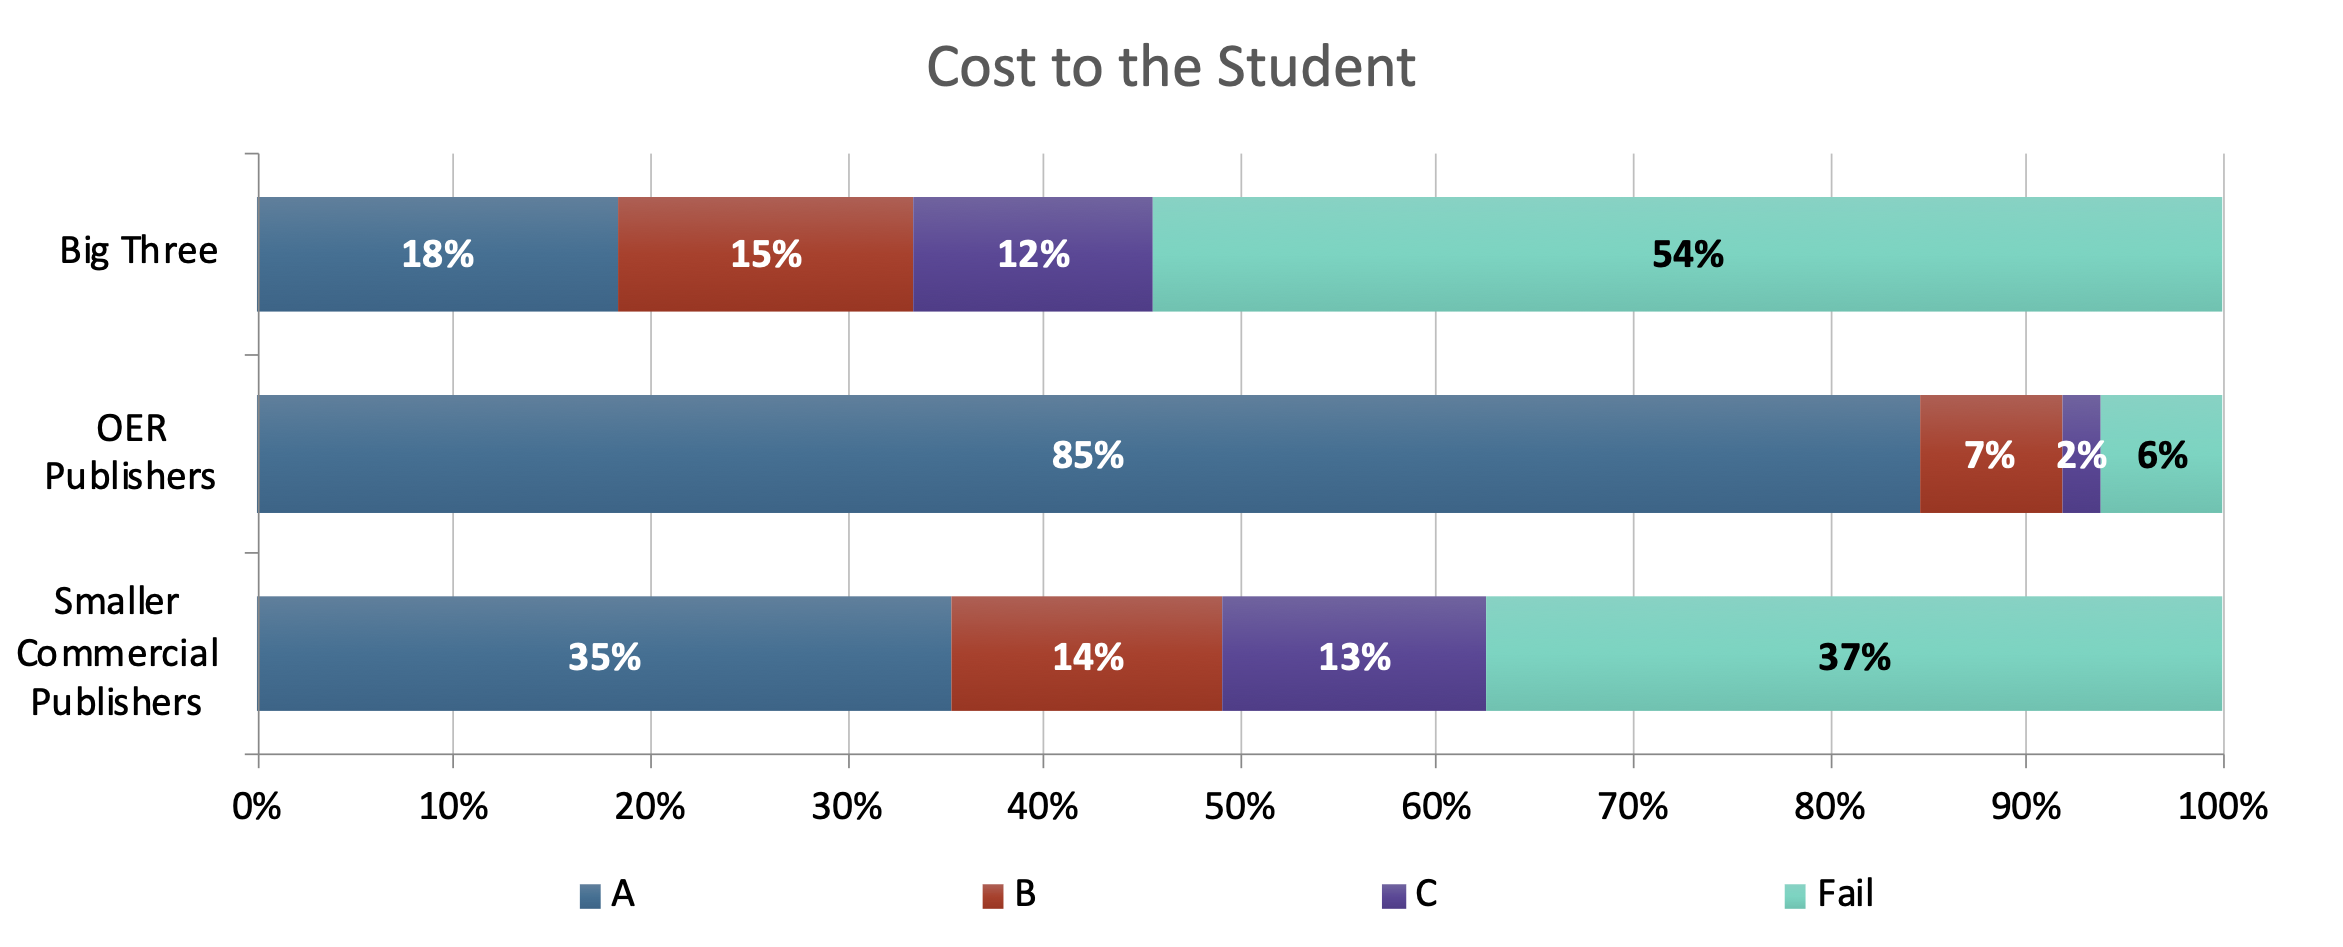 Cost to the student